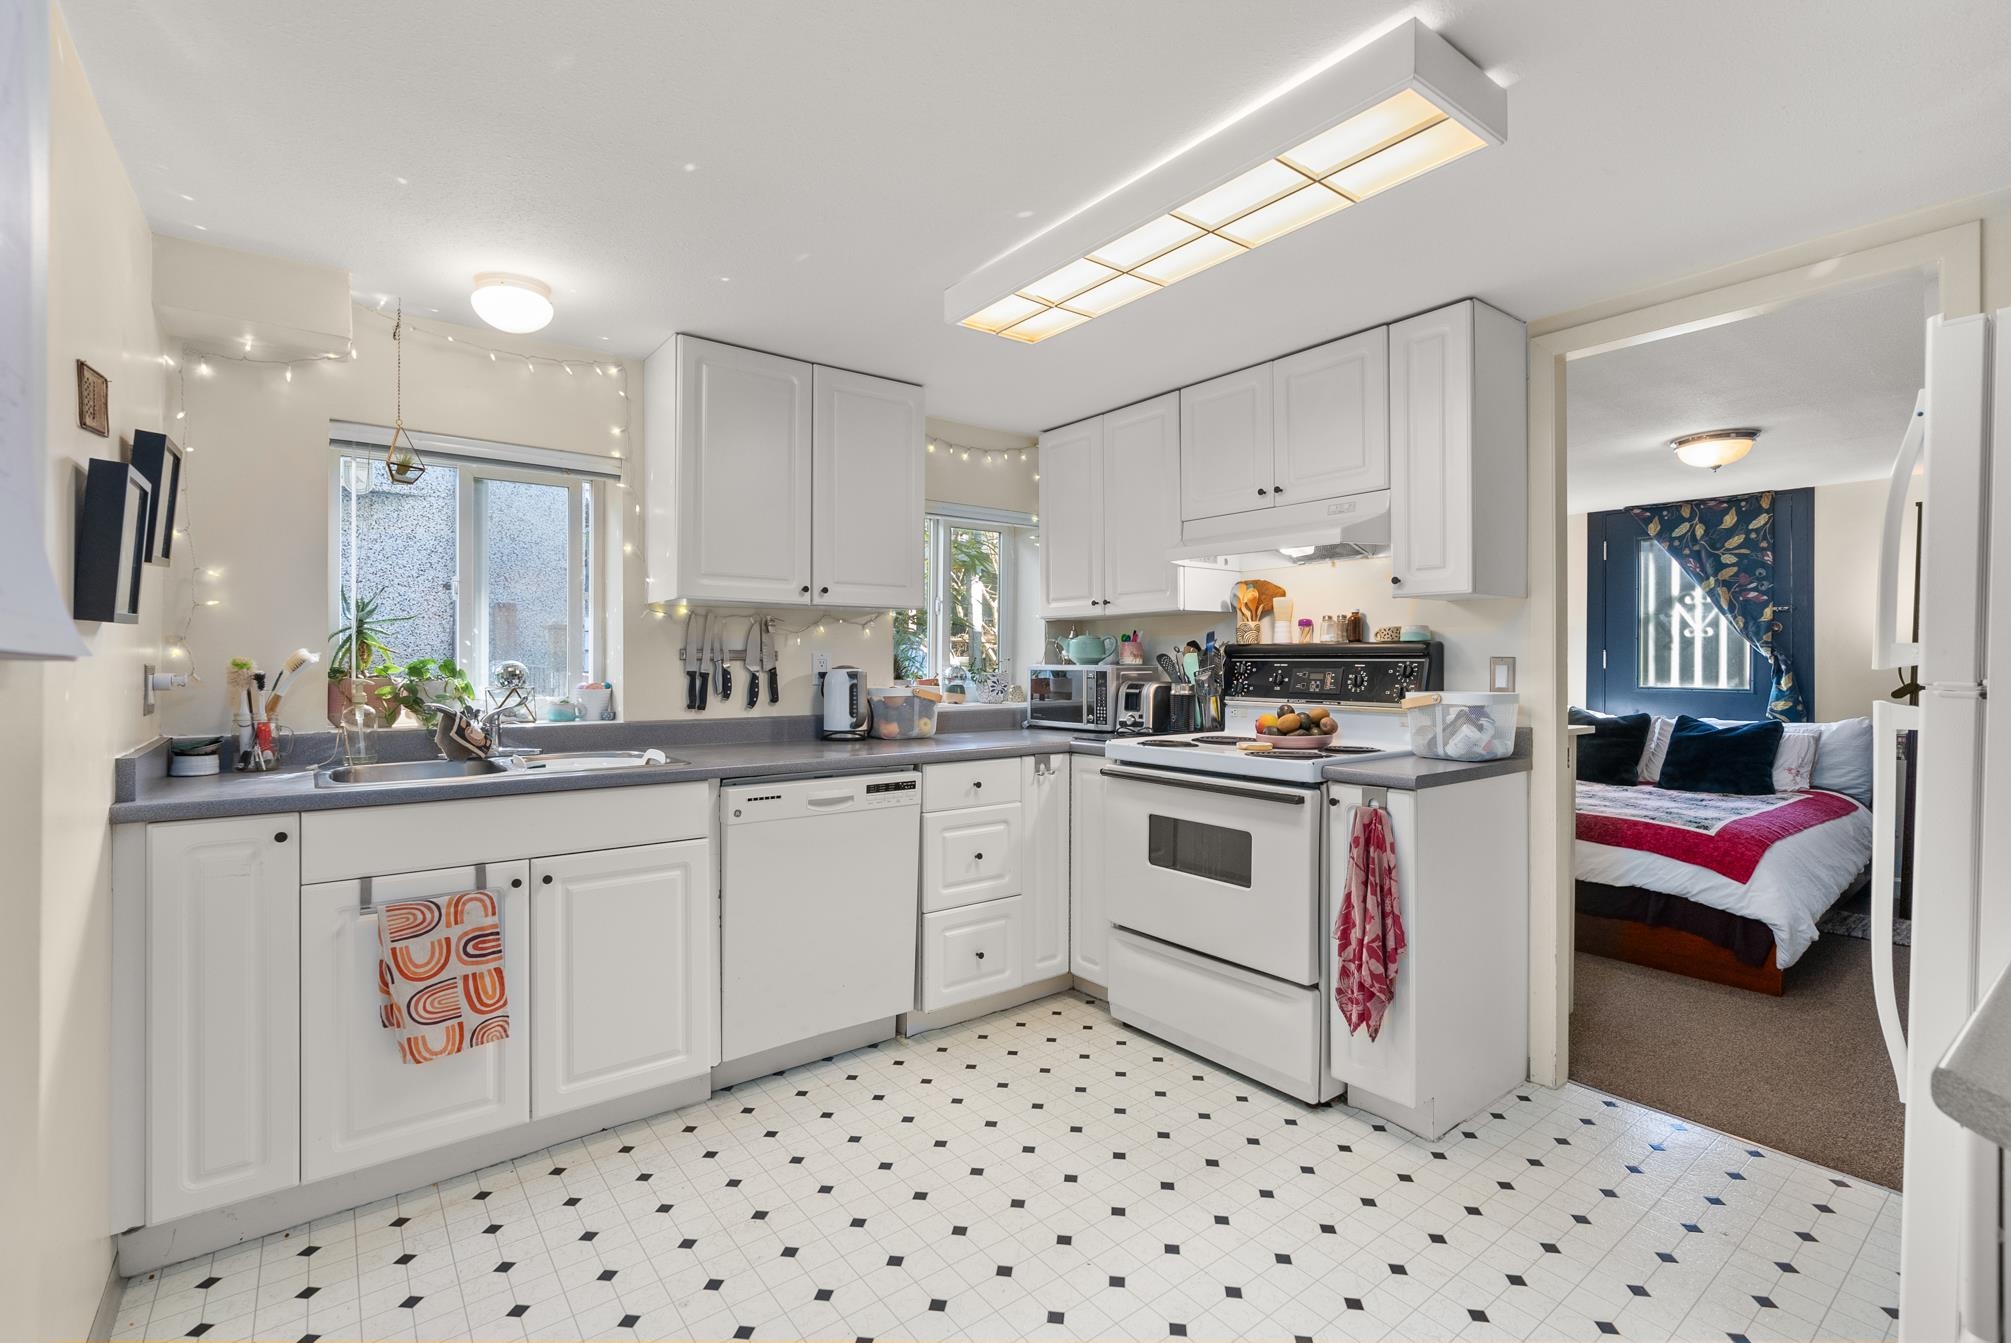 Listing image of 28 W 21ST AVENUE